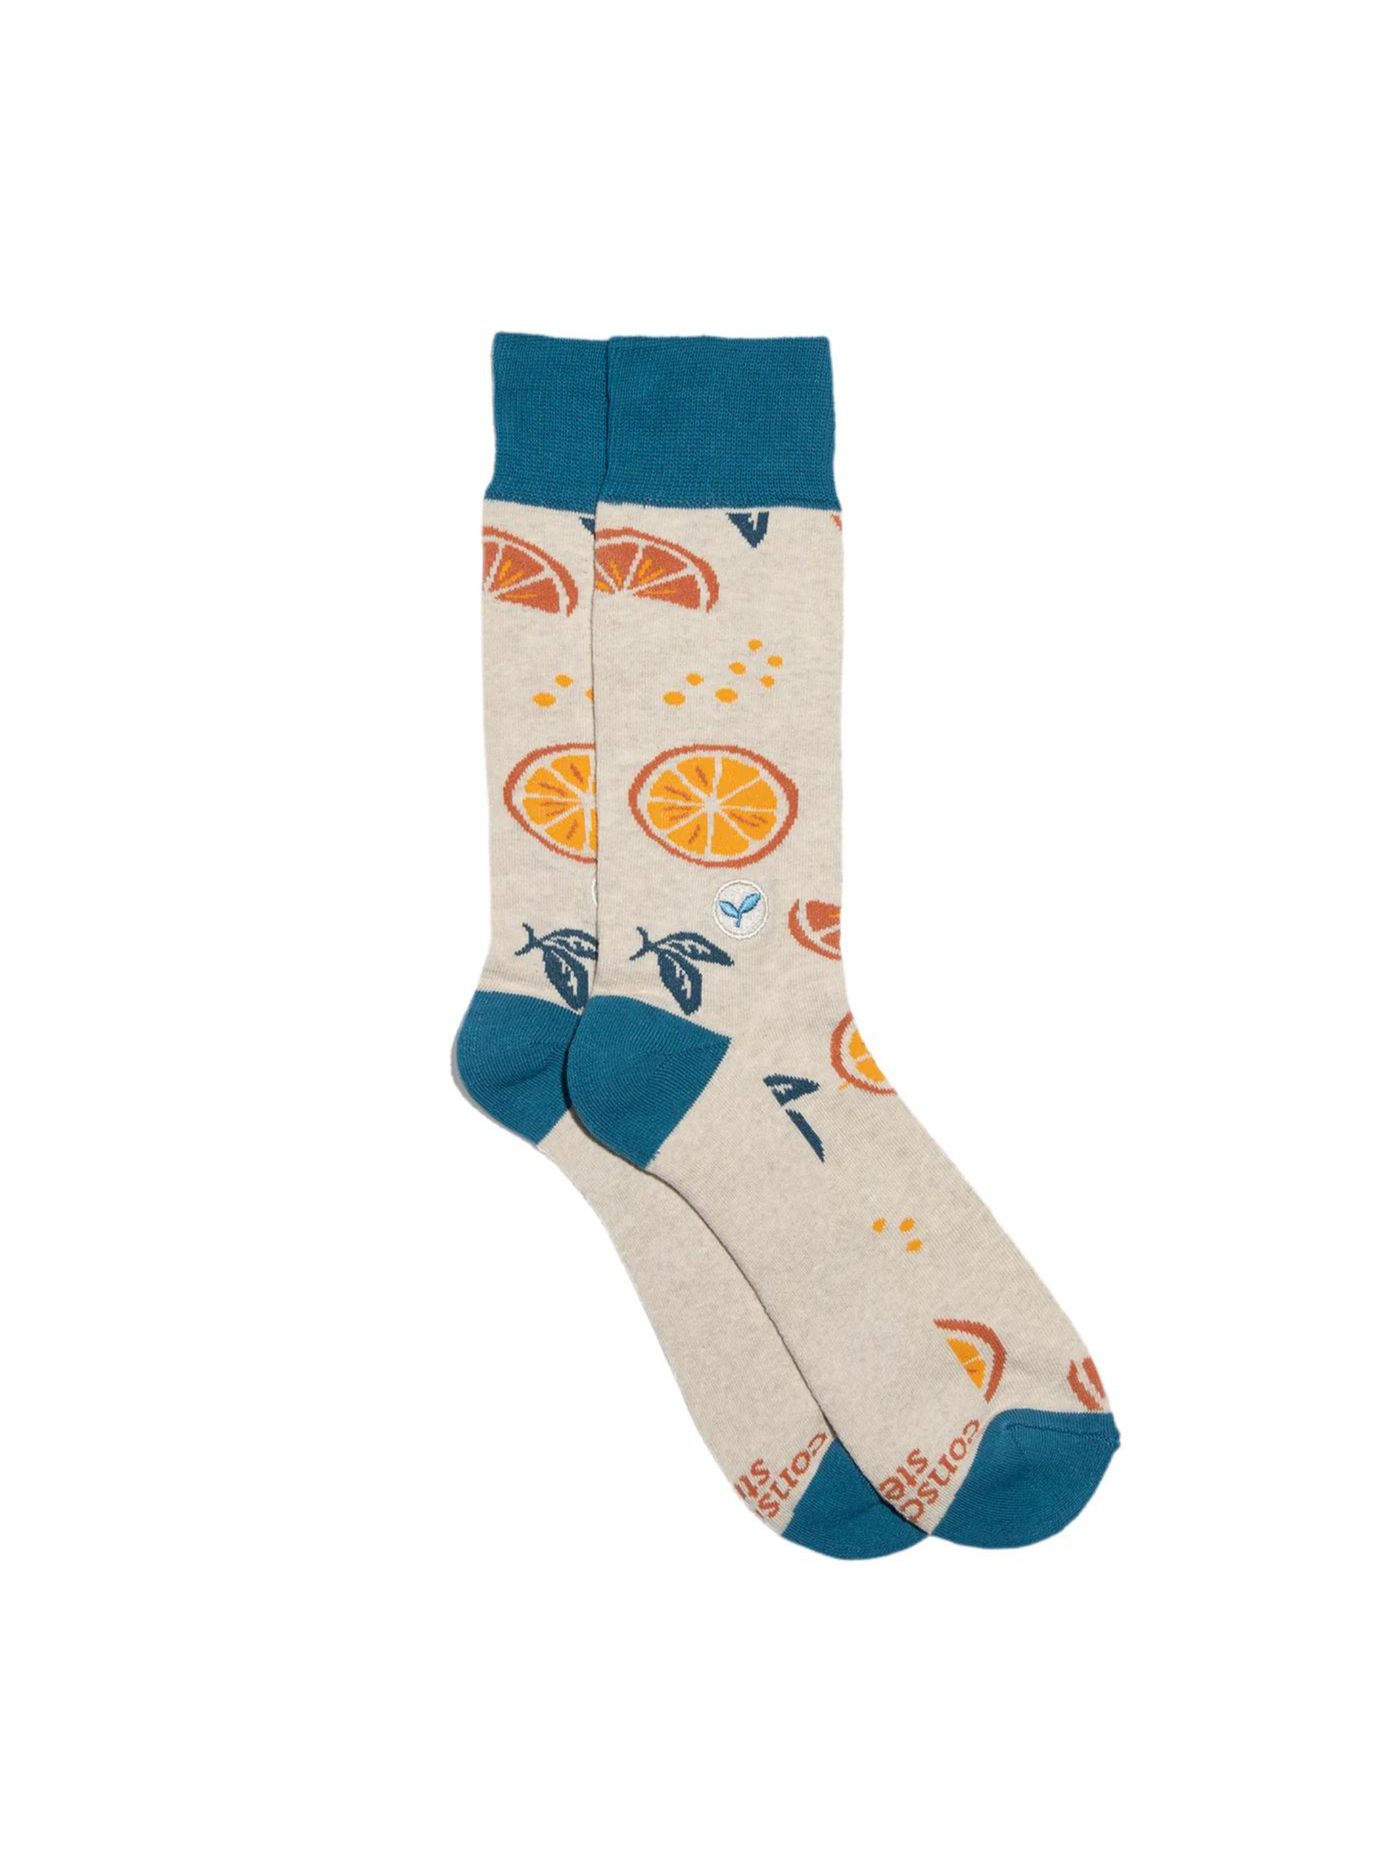 Socks That Plant Trees - Fresh Squeeze